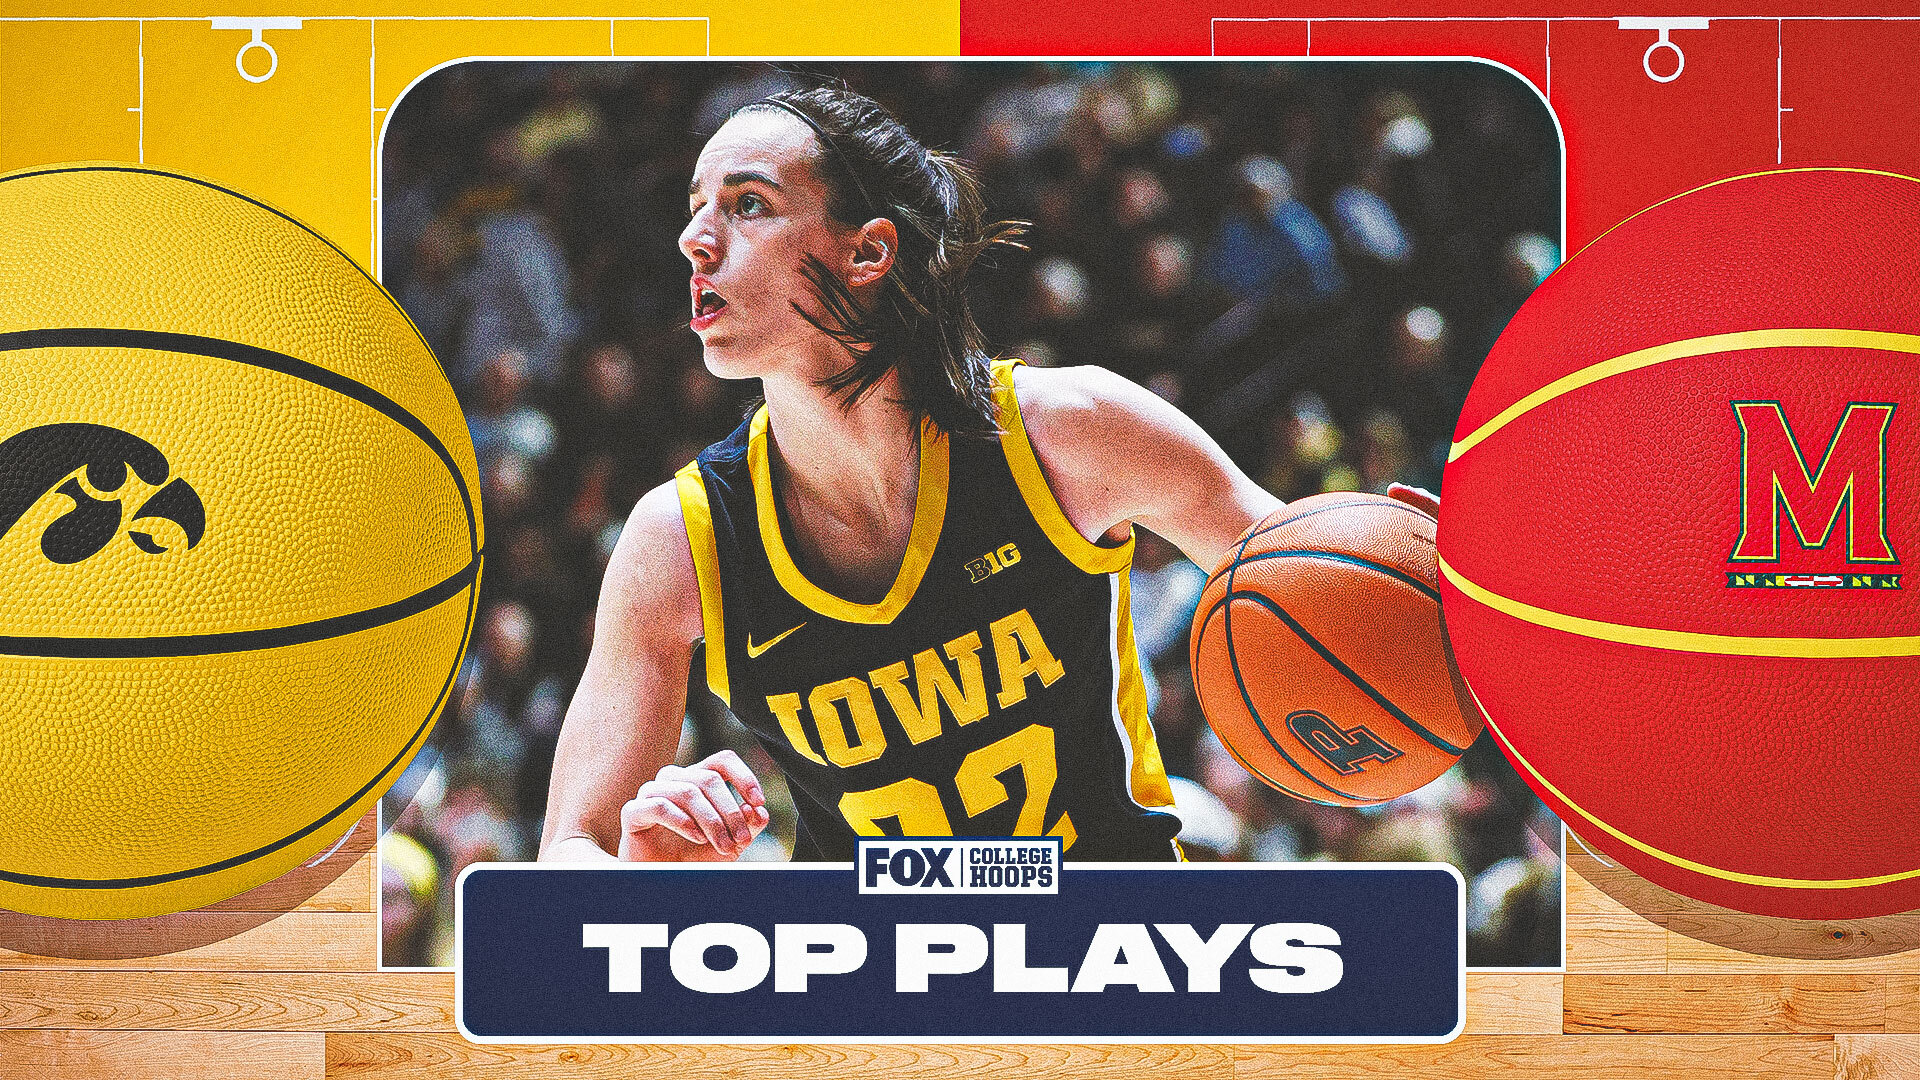 Iowa vs. Maryland highlights: Caitlin Clark scores 38, leads Hawkeyes to win